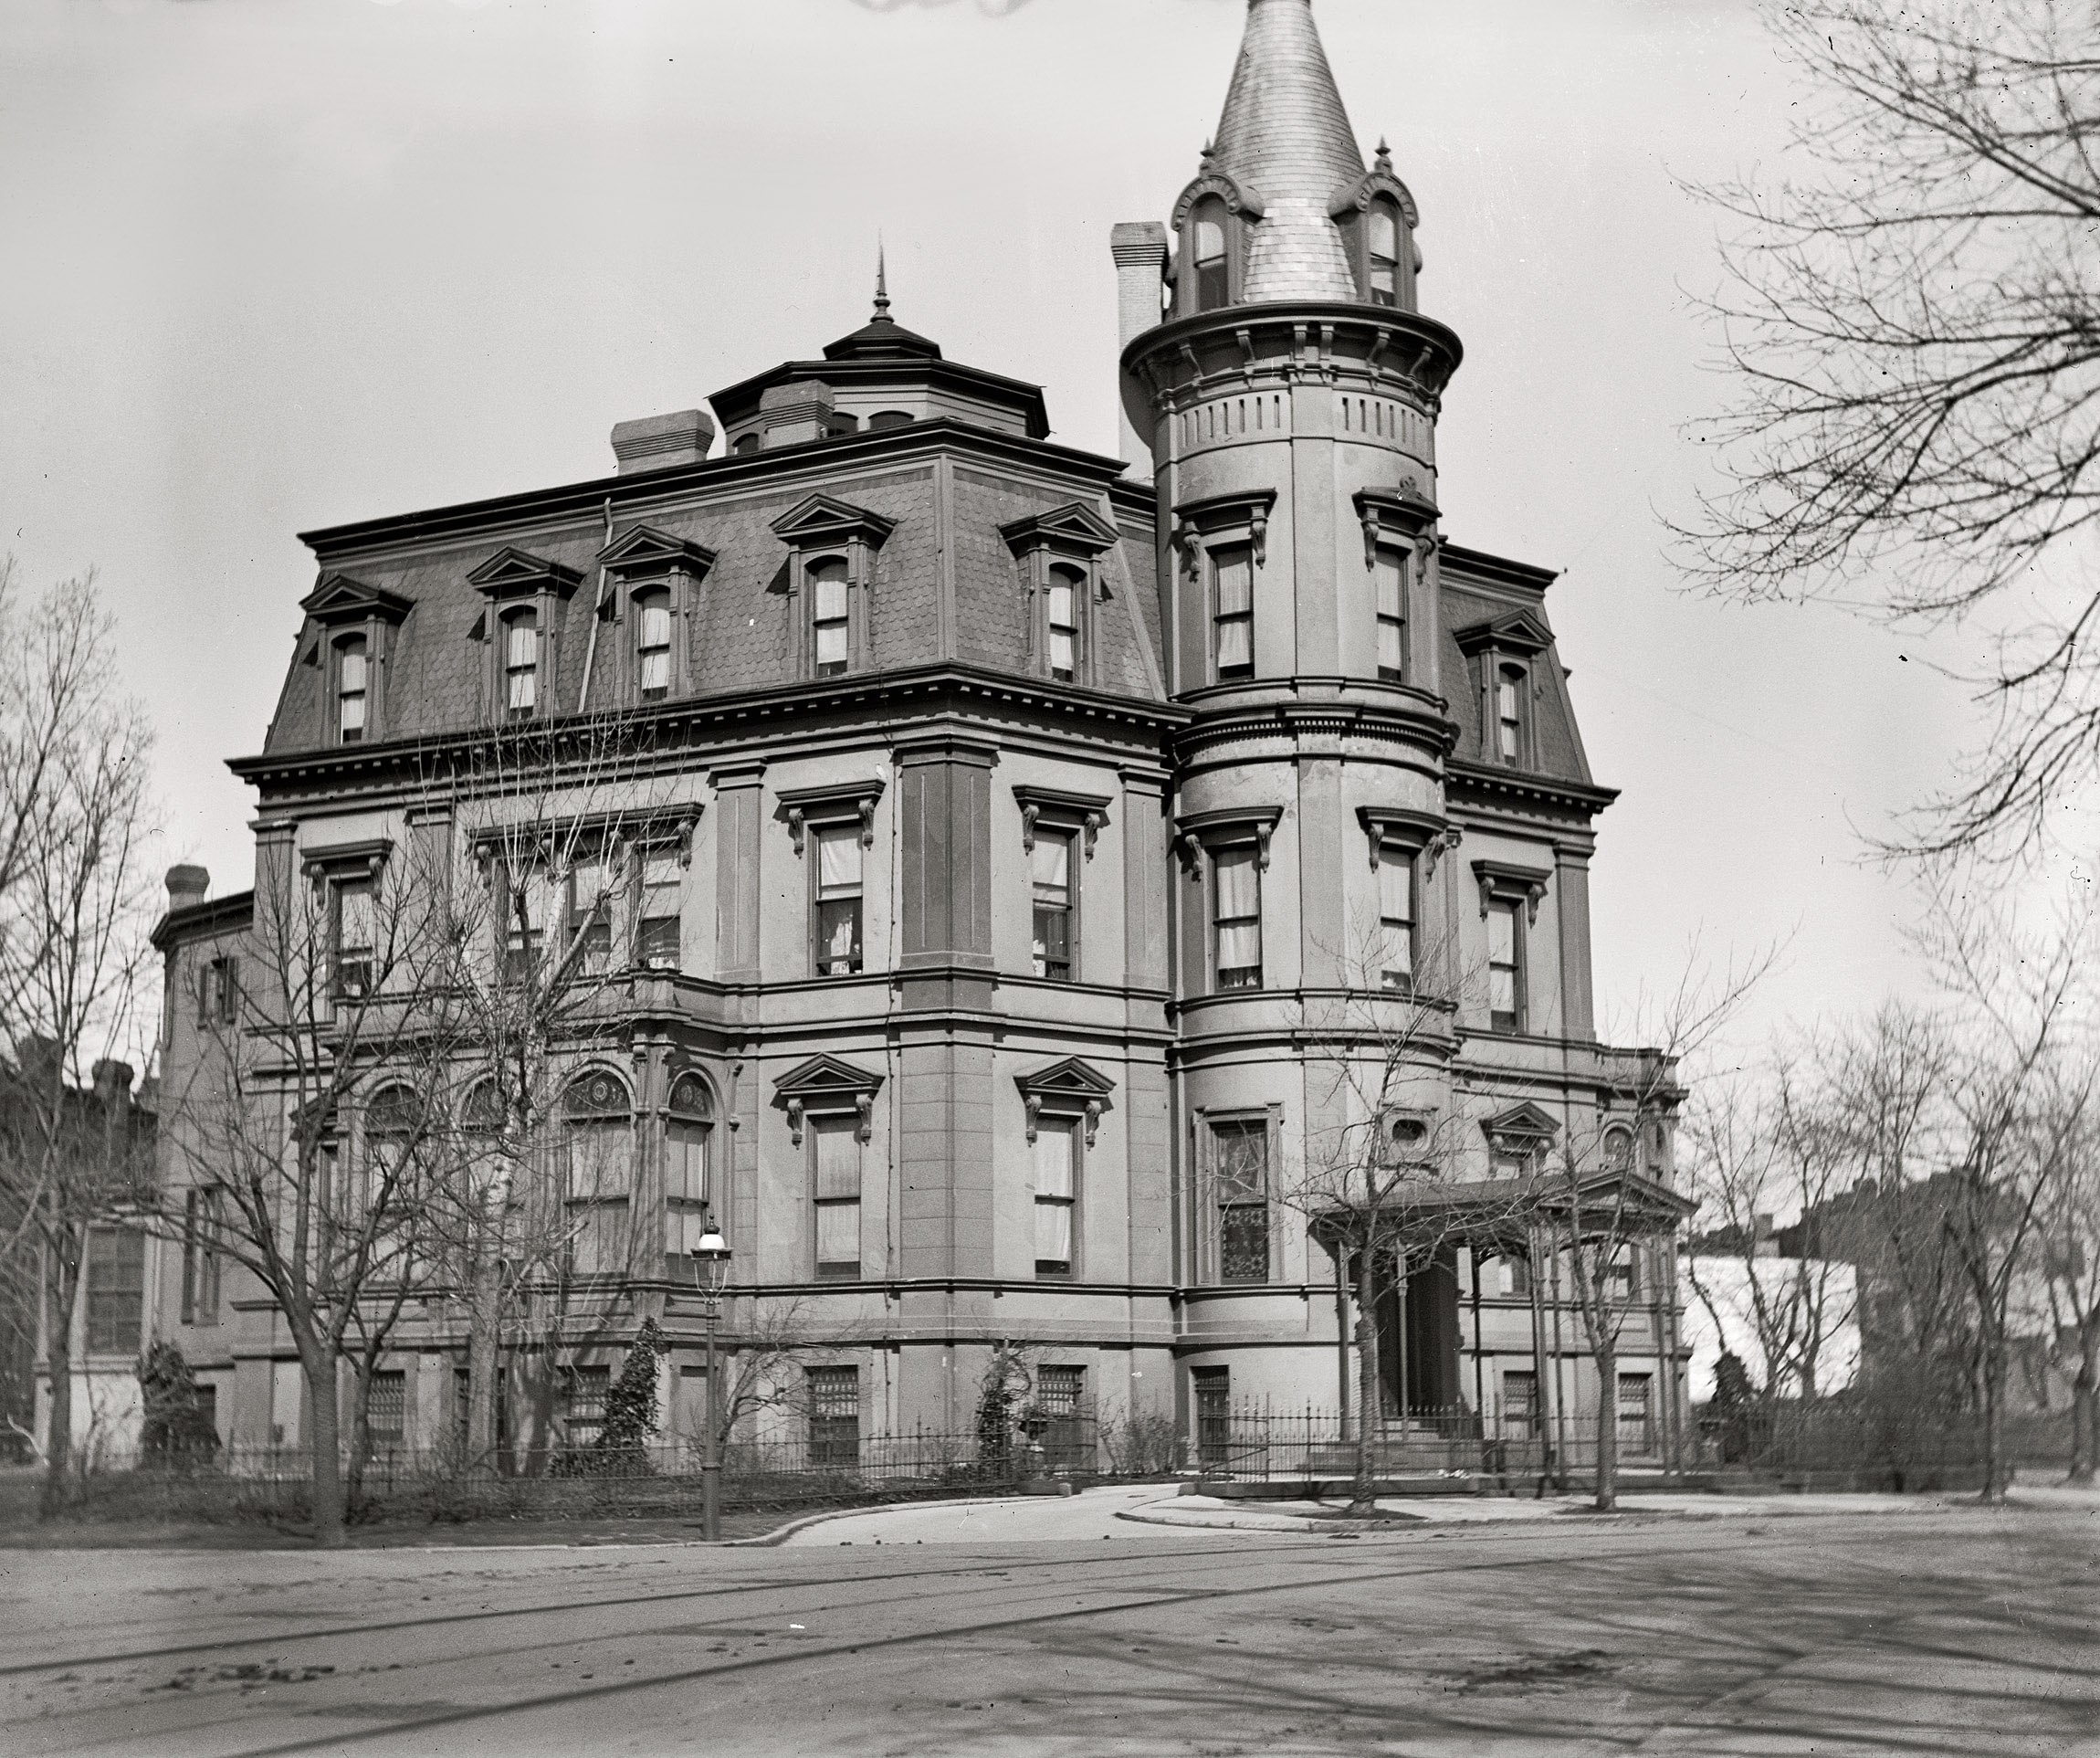 Washington circa 1900. "Stewart's Castle, Dupont Circle." The William Morris Stewart house on Massachusetts Avenue, designed by Adolph Cluss, shortly before it was demolished. National Photo glass negative. View full size.